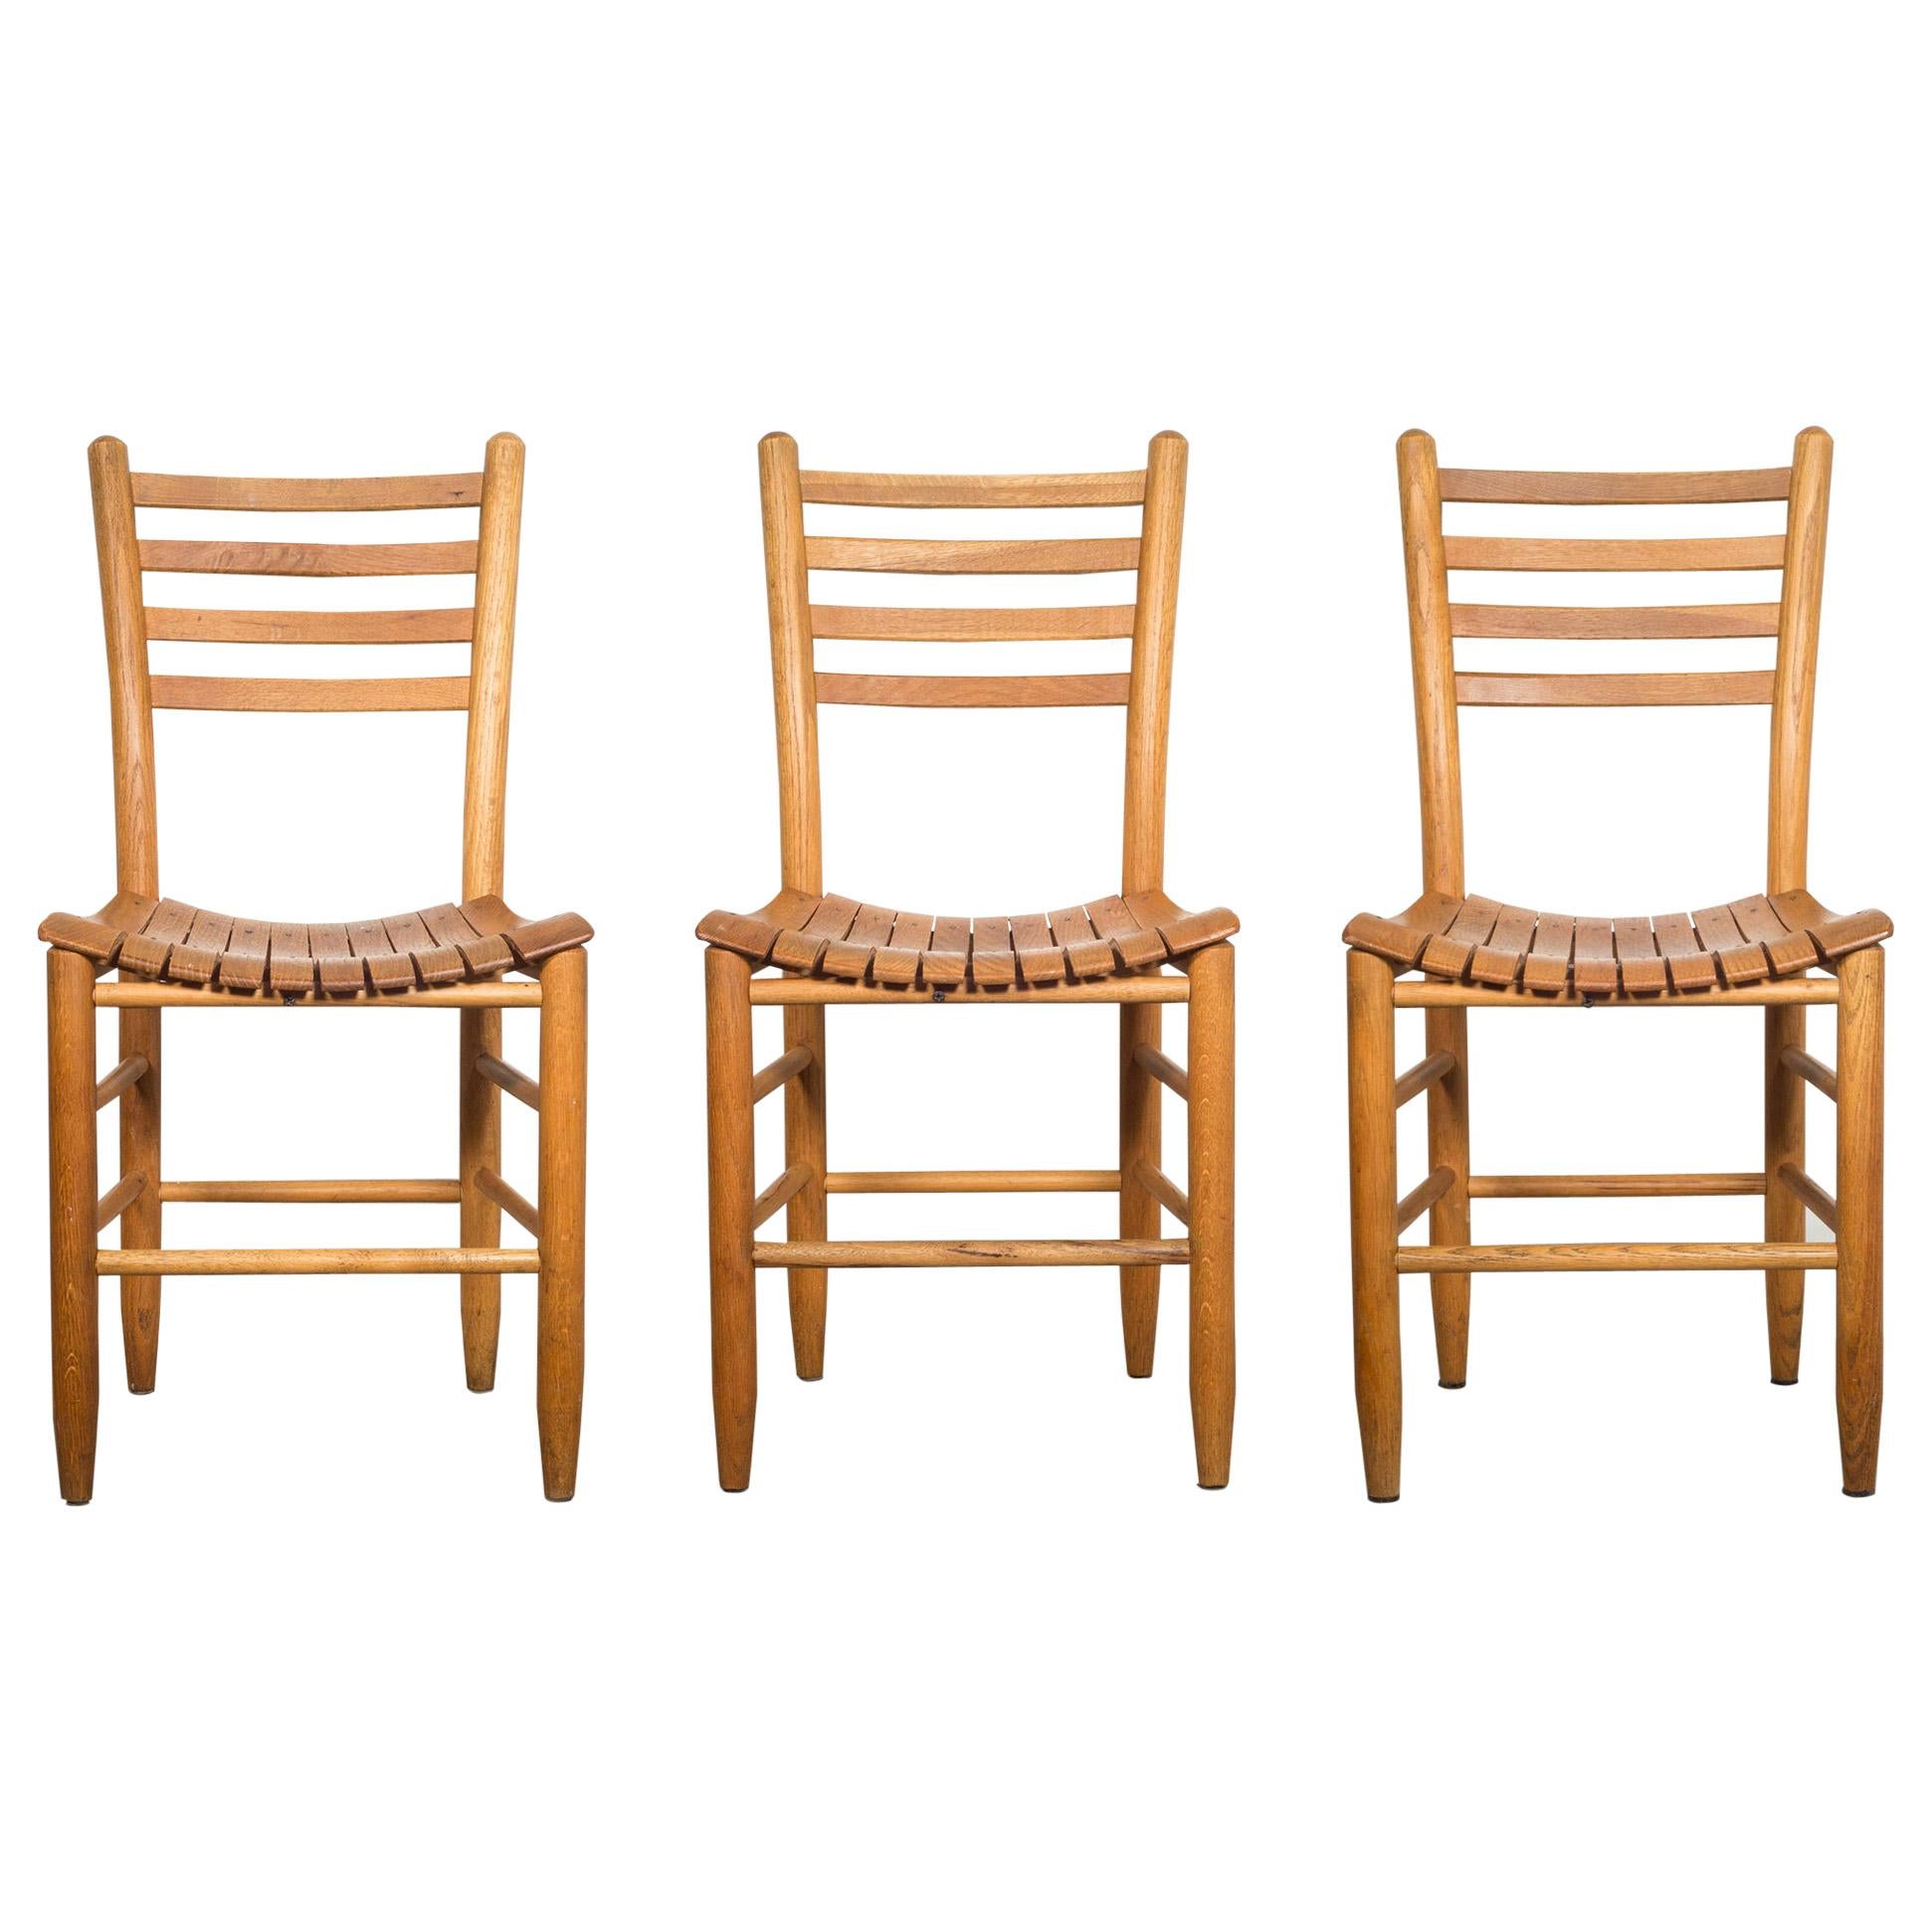 About

Wooden ladder back dining chairs with slotted seats in the style of Author Umanoff. These chairs have retained their original finish and have the appropriate patina for the age and use. Each chair is sturdy and structurally sound.

Price